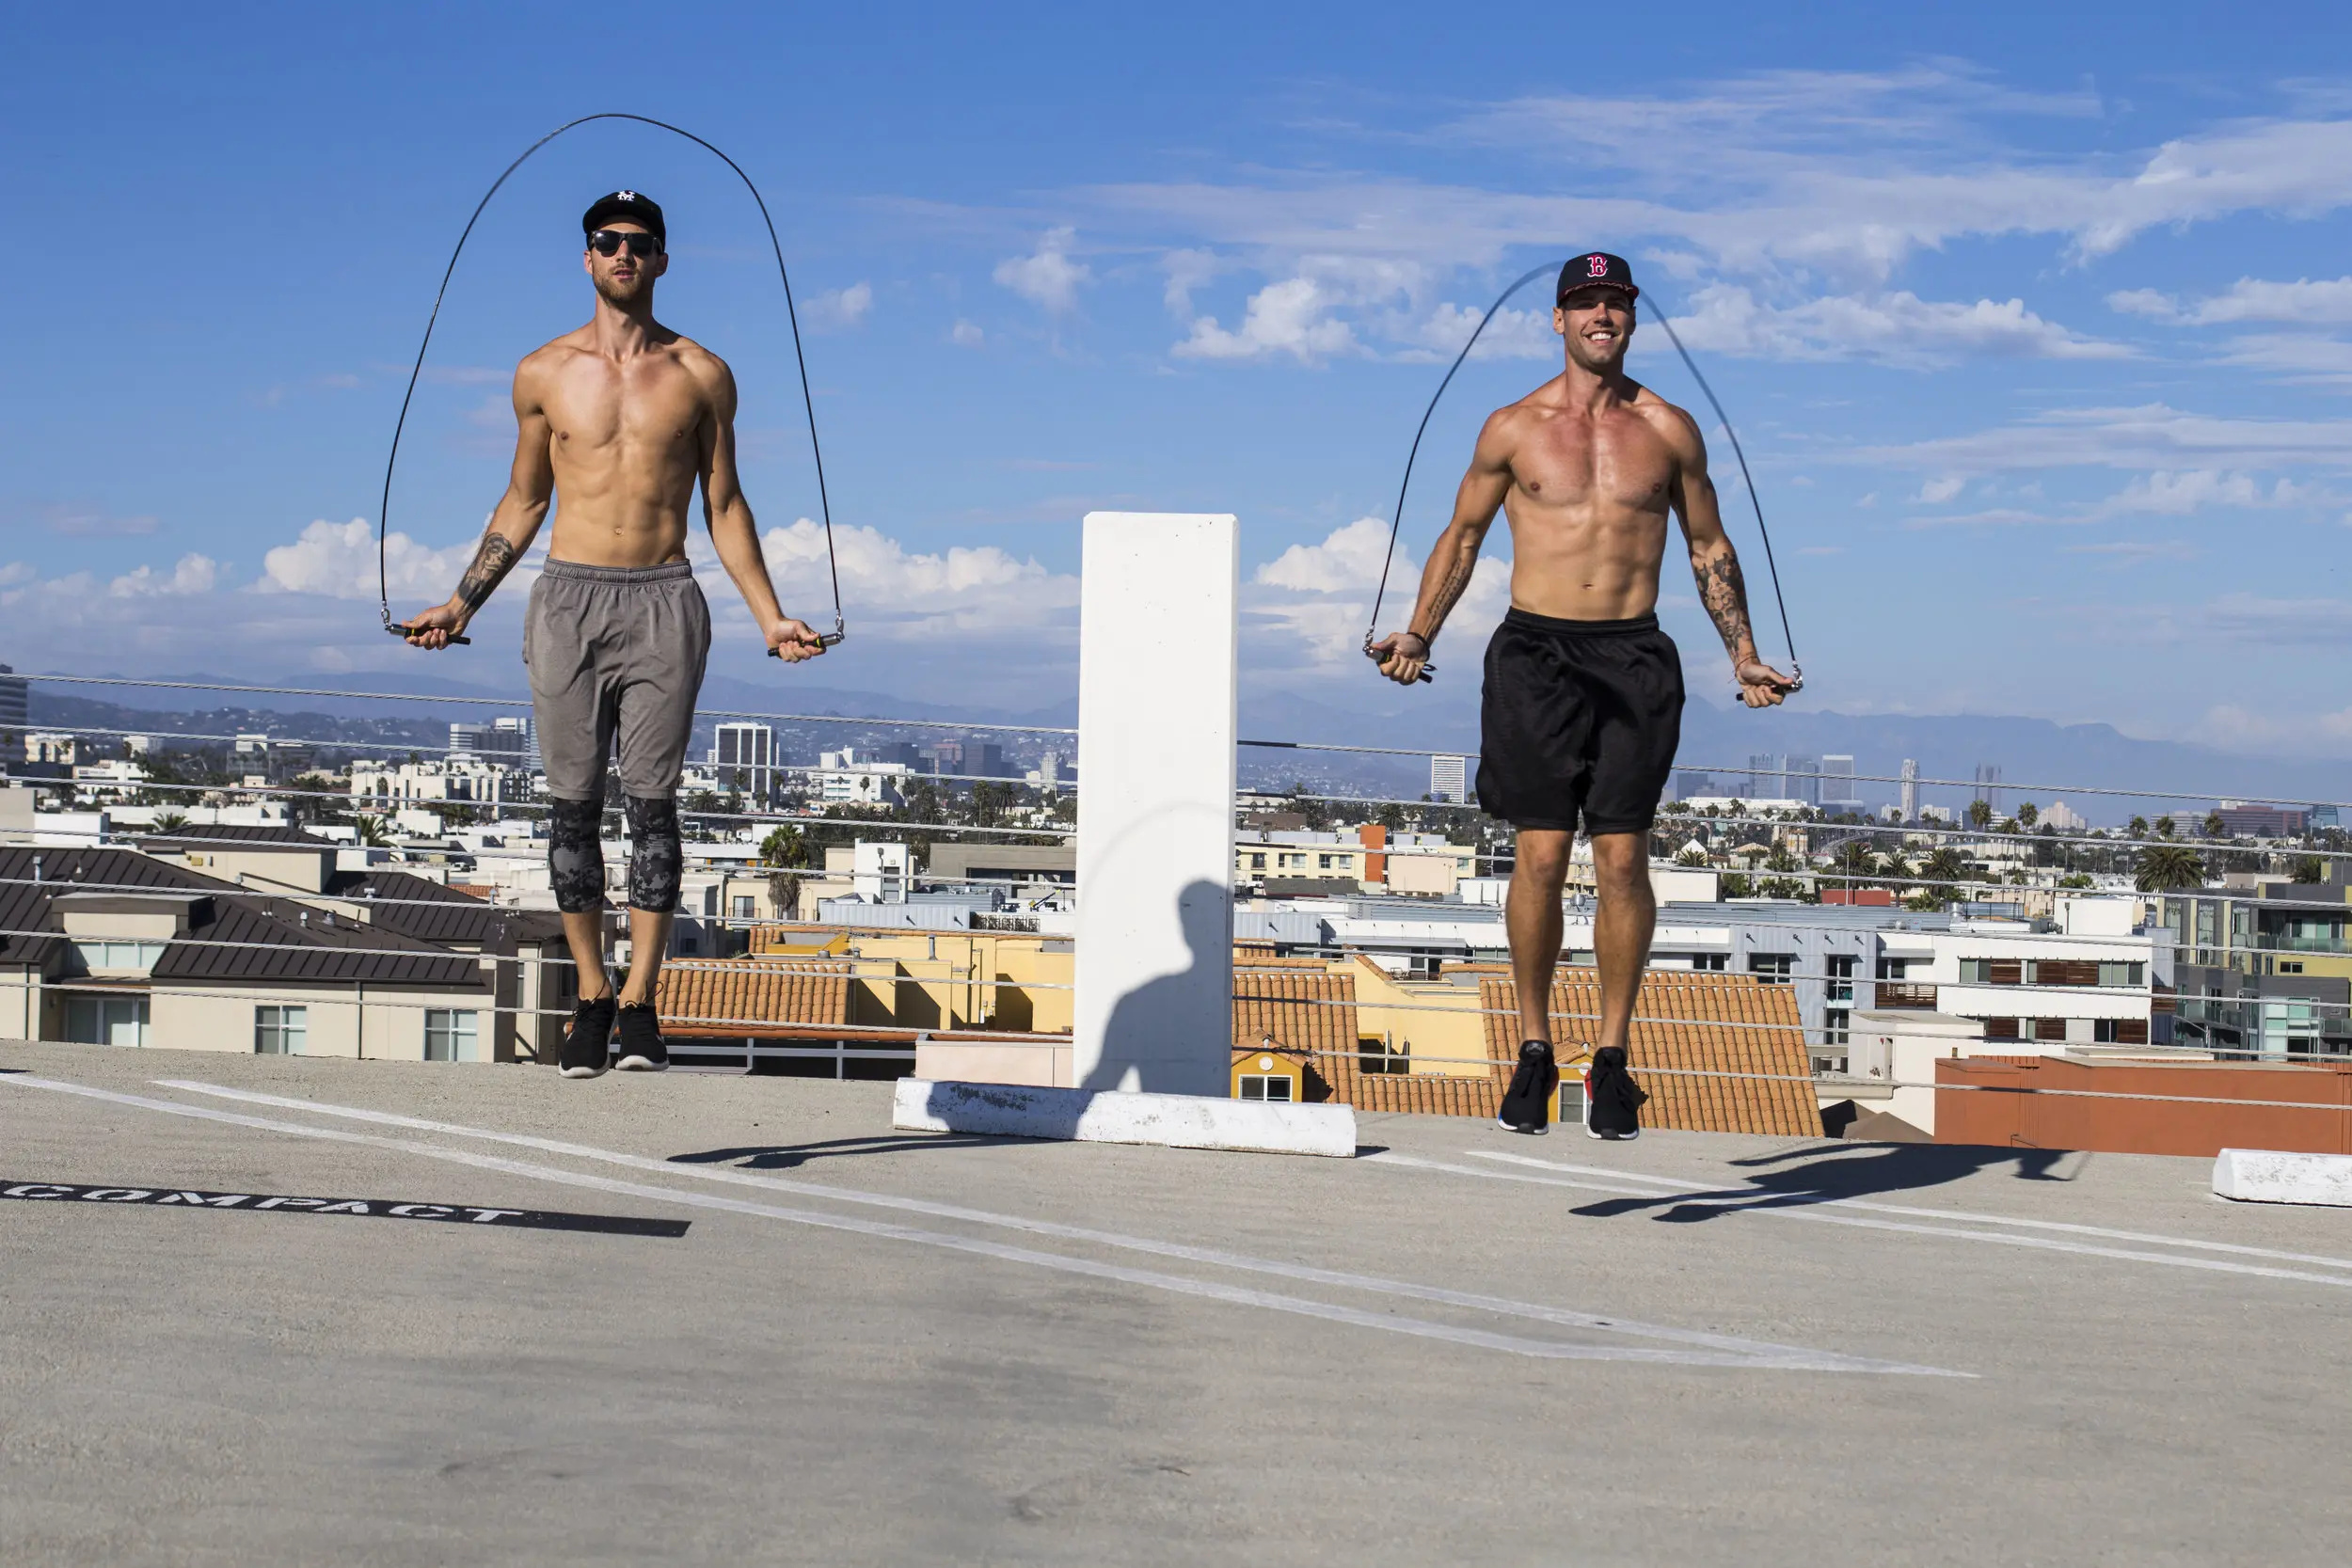 Rope Jumping: Burning calories, Ropes dudes, The workout on the roof. 2500x1670 HD Wallpaper.